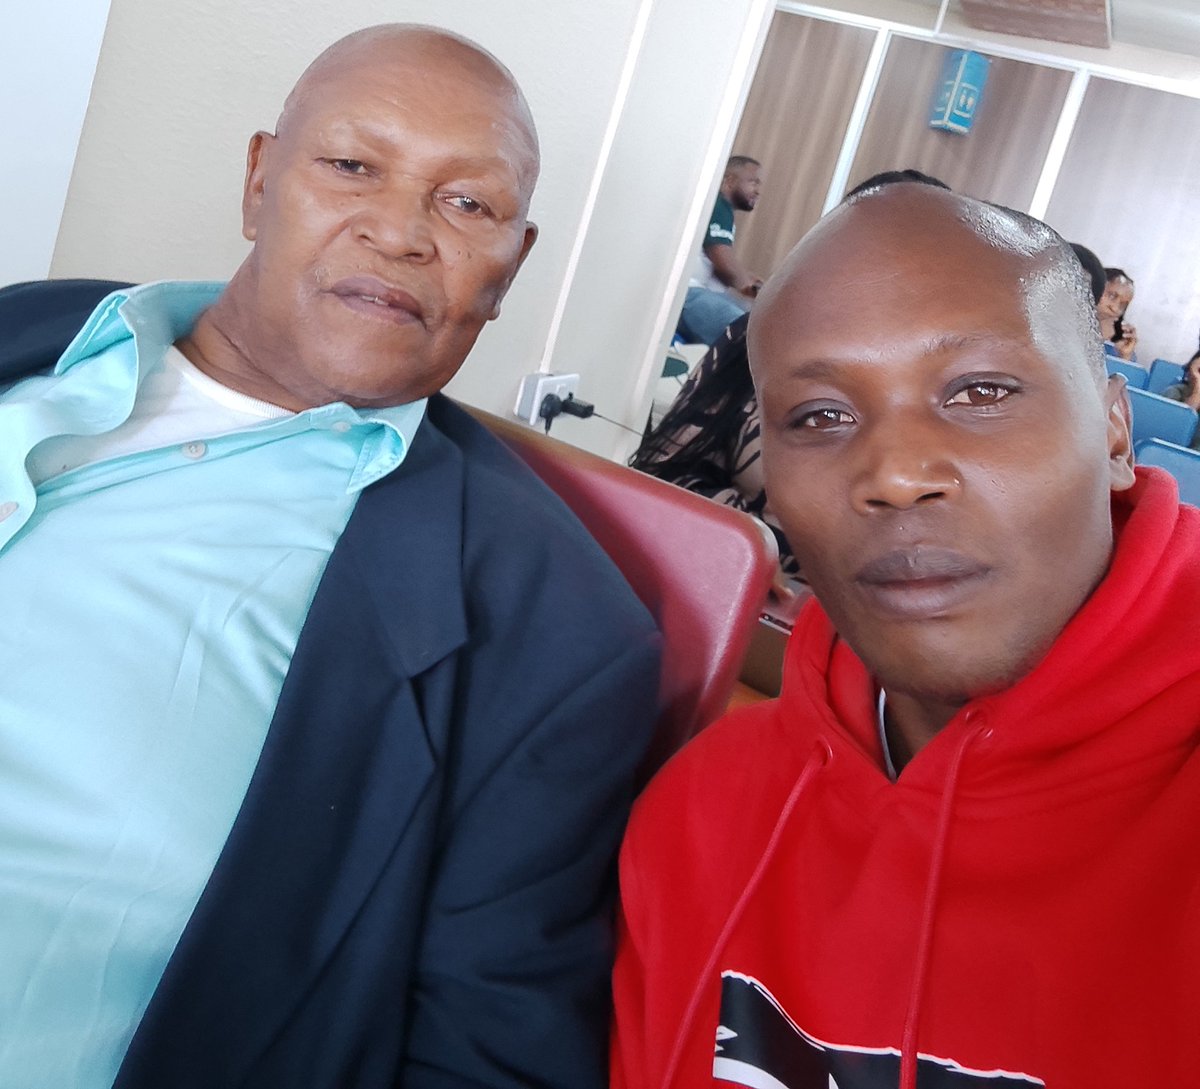 With the legend himself, Kipchoge Keino, heading back to Eldoret after the Kip Keino Classic Continental Tour Gold meet